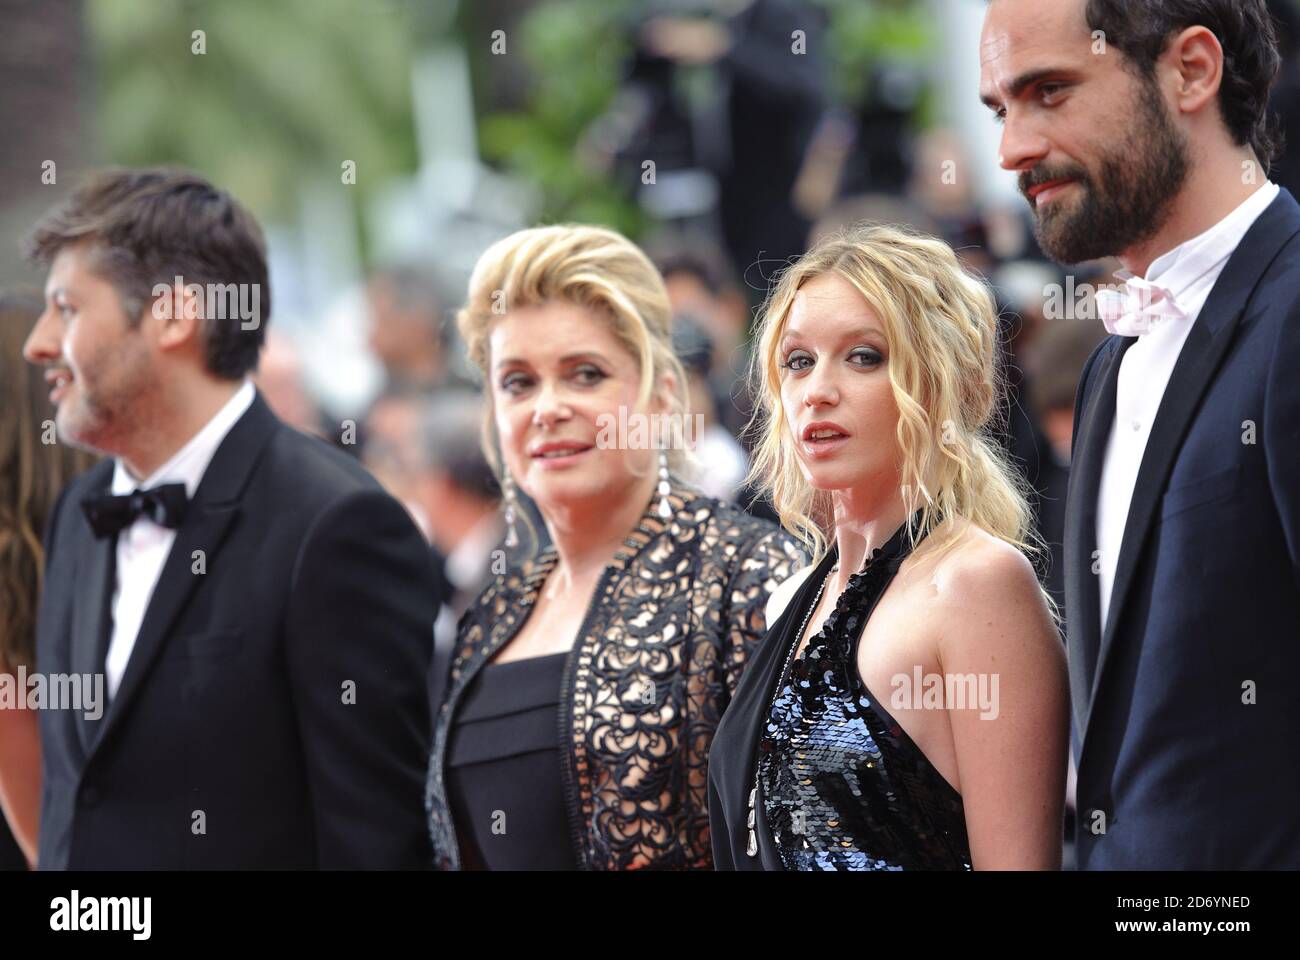 Catherine Deneuve and Ludivine Sagnier arriving at the premiere of Les Bien-Aimes and the closing ceremony of the 64th Cannes International Film Festival, at the Palais des Festivales in Cannes, France. Stock Photo